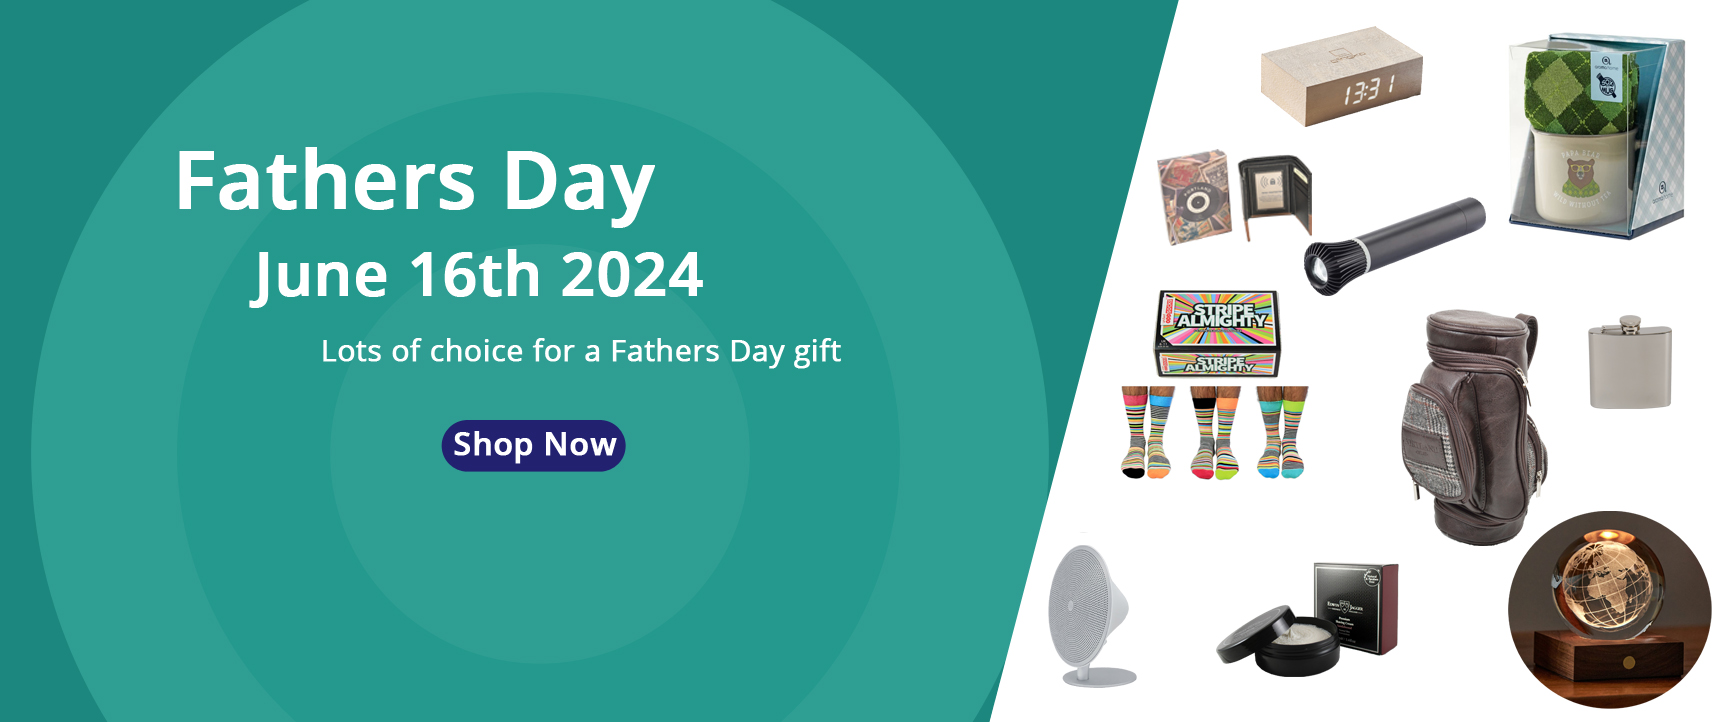 Gifts To Say Thanks For Being My Dad Or Grandad Fathers Day 2024 is on Sunday 16th June